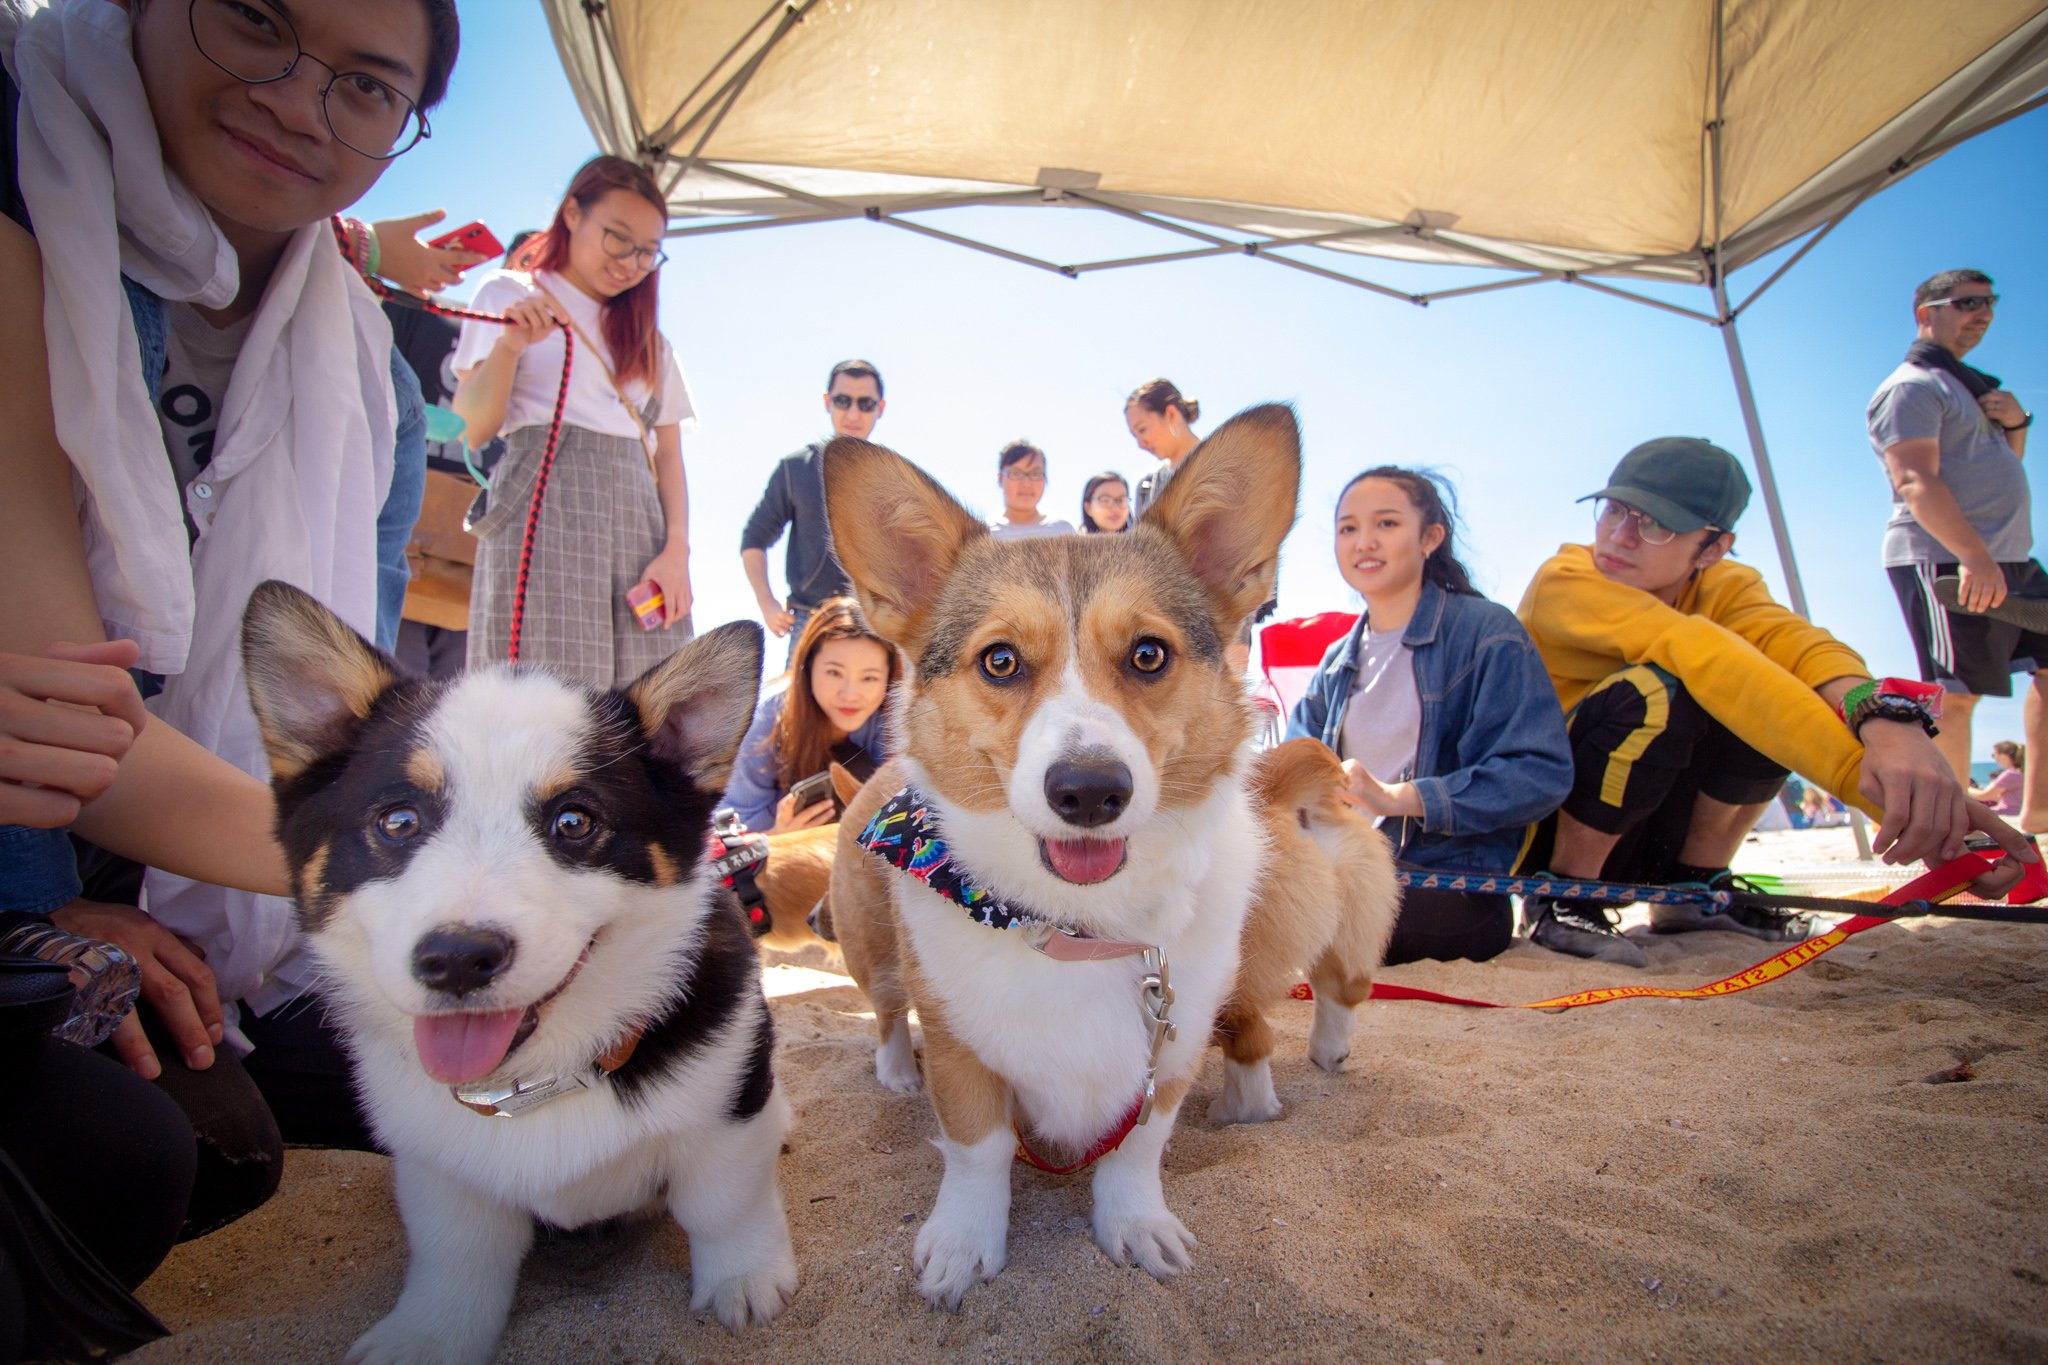 Orange County Pet and Dog Photography - by Steamer Lee - Corgi Beach Day Spring 2019 - Southern Caliornia 26.JPG